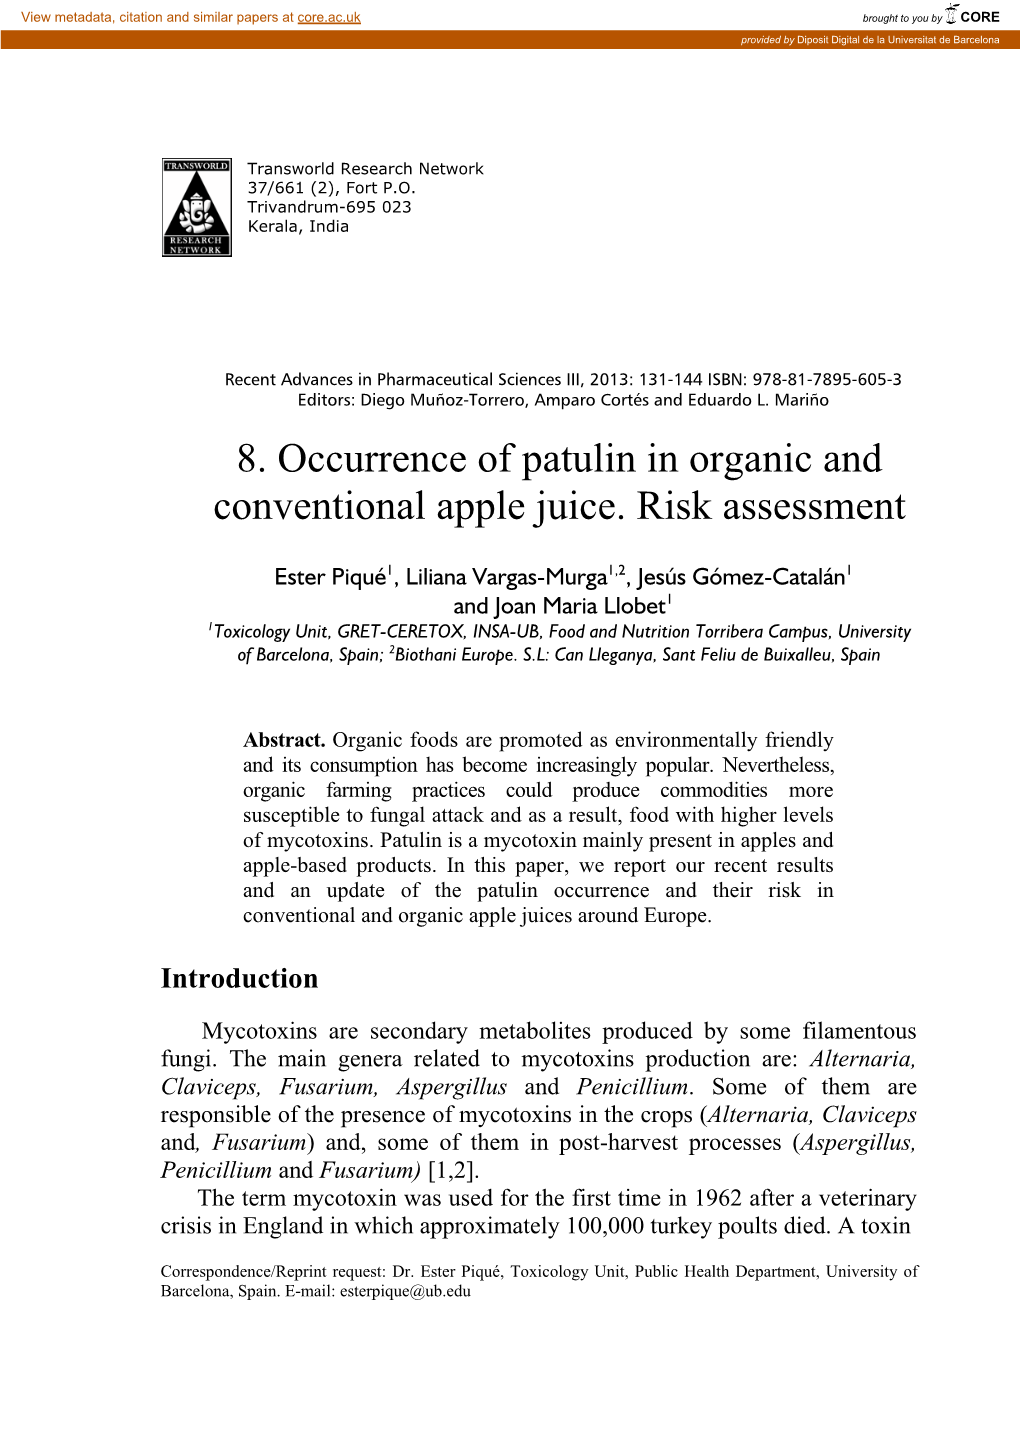 8. Occurrence of Patulin in Organic and Conventional Apple Juice. Risk Assessment